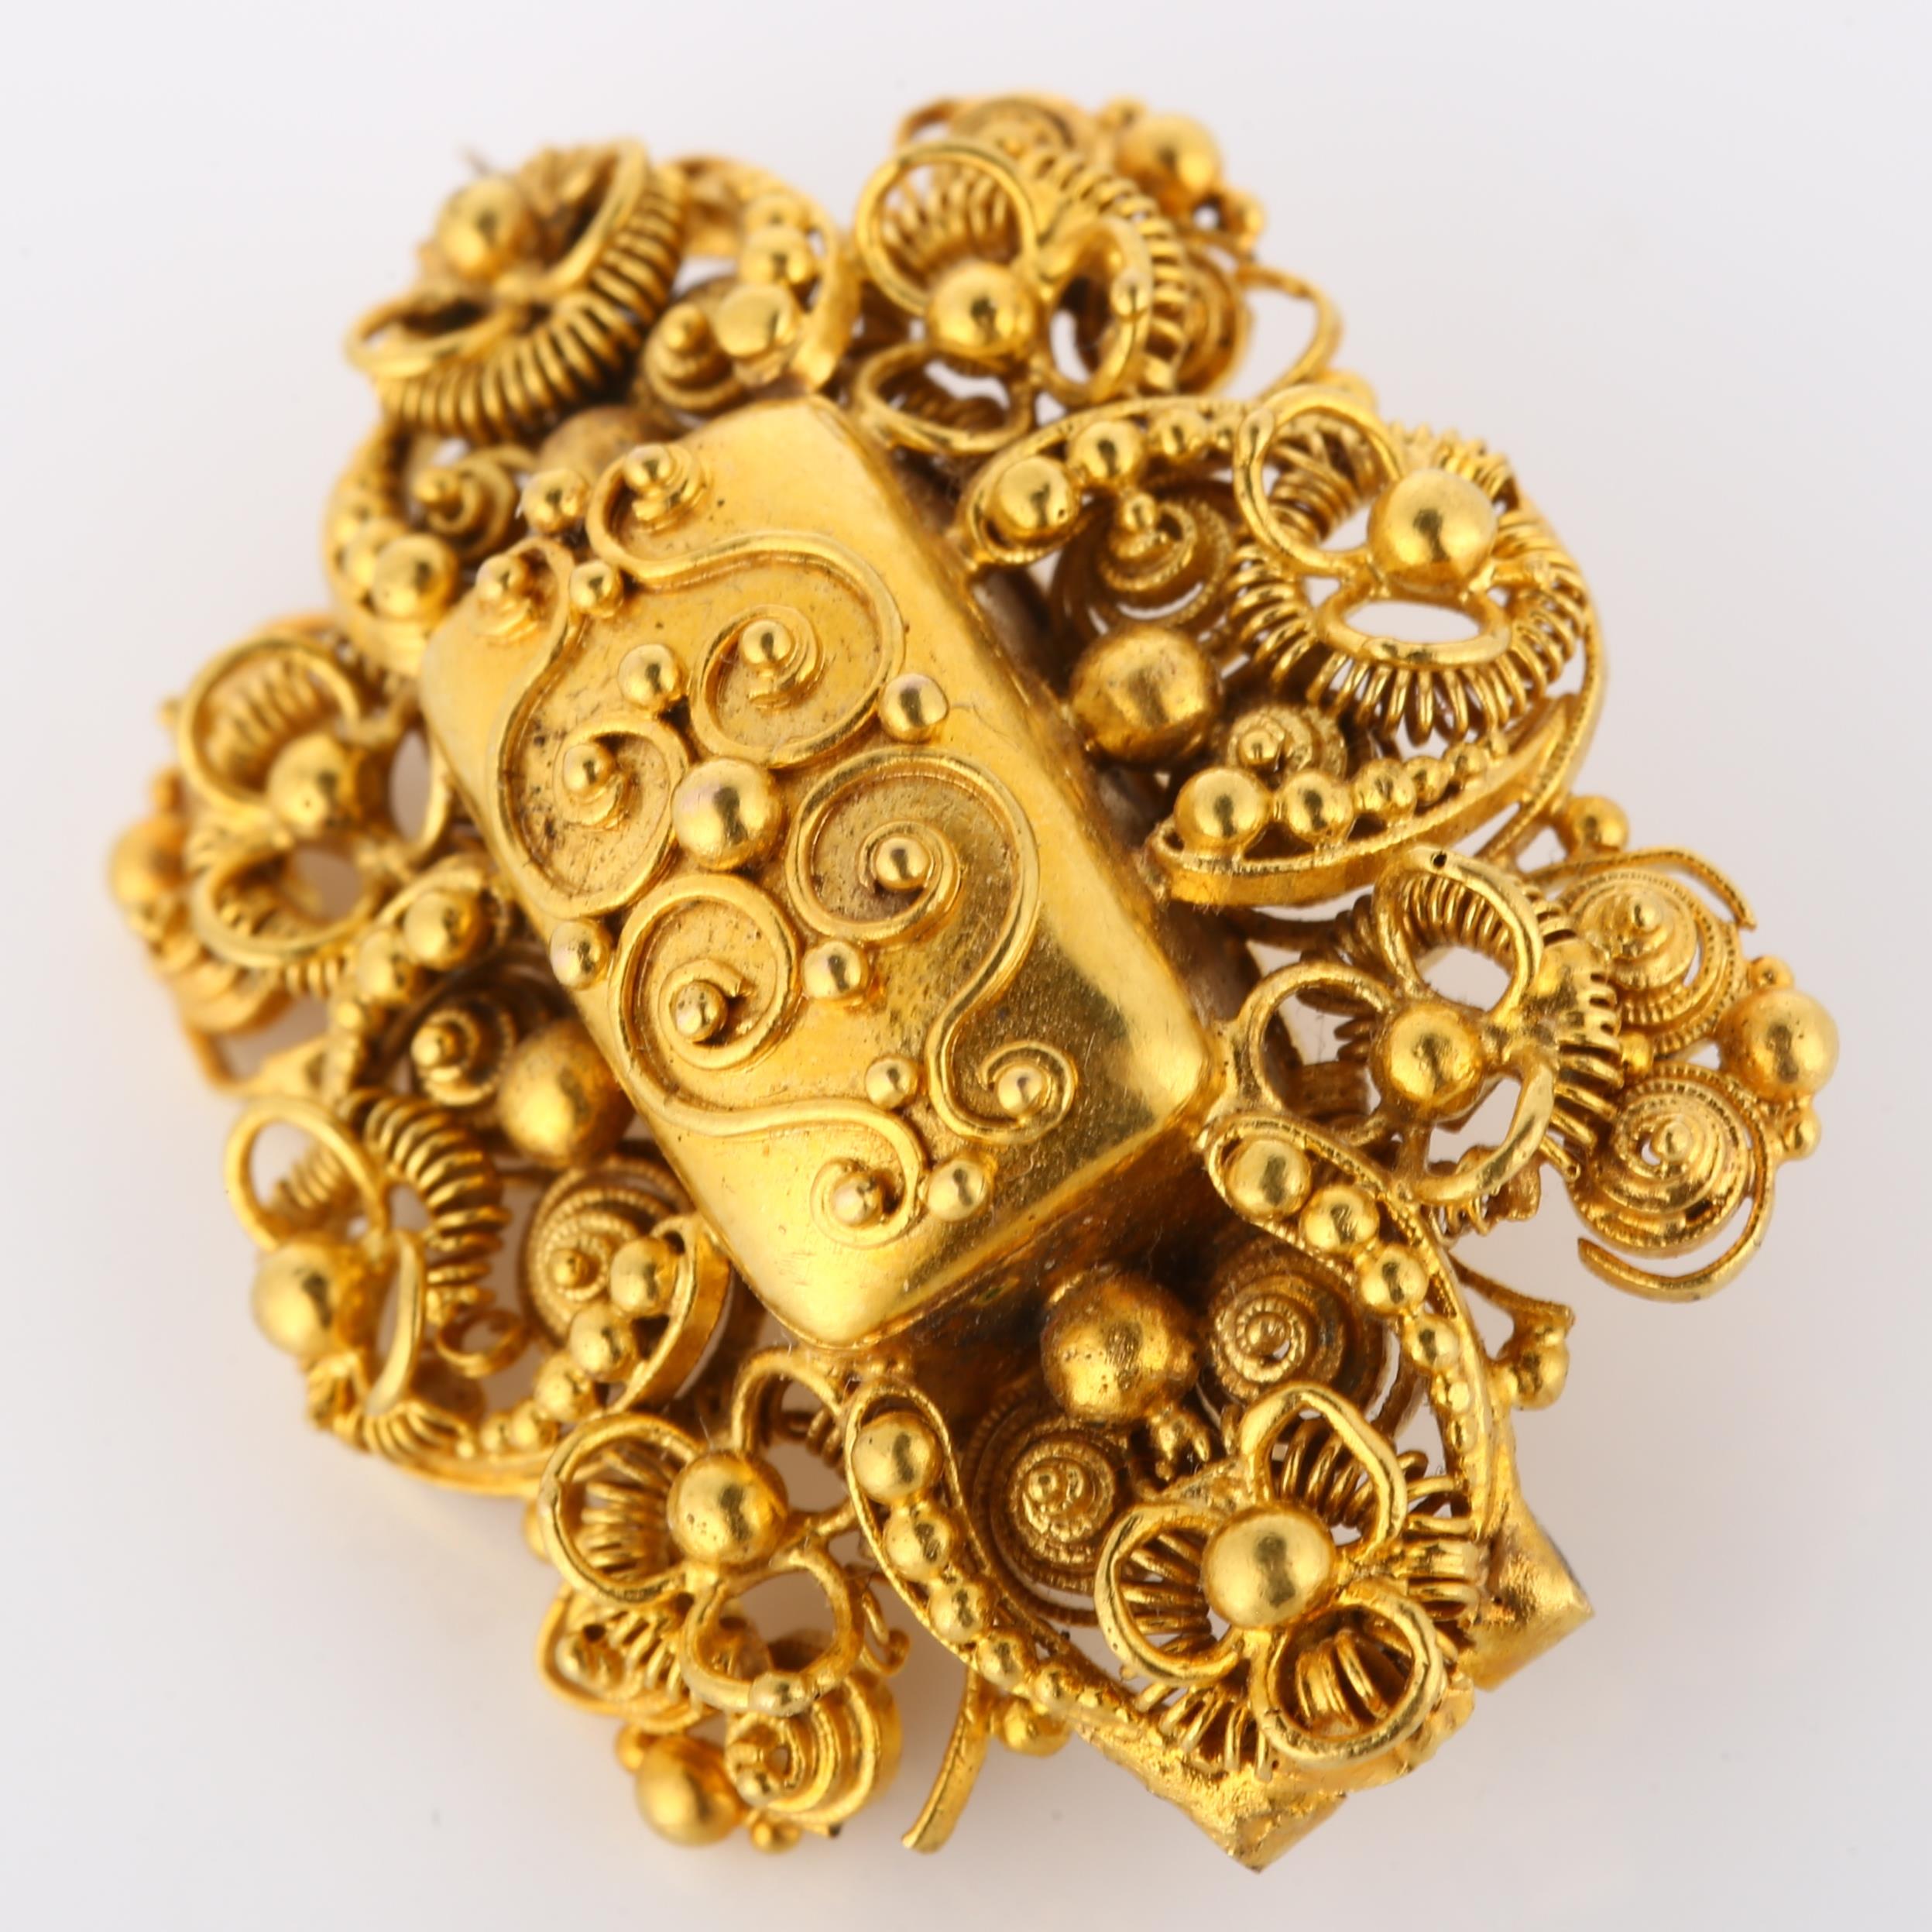 A Victorian Etruscan Revival brooch, unmarked gold settings with cannetille decoration, brooch - Image 2 of 4